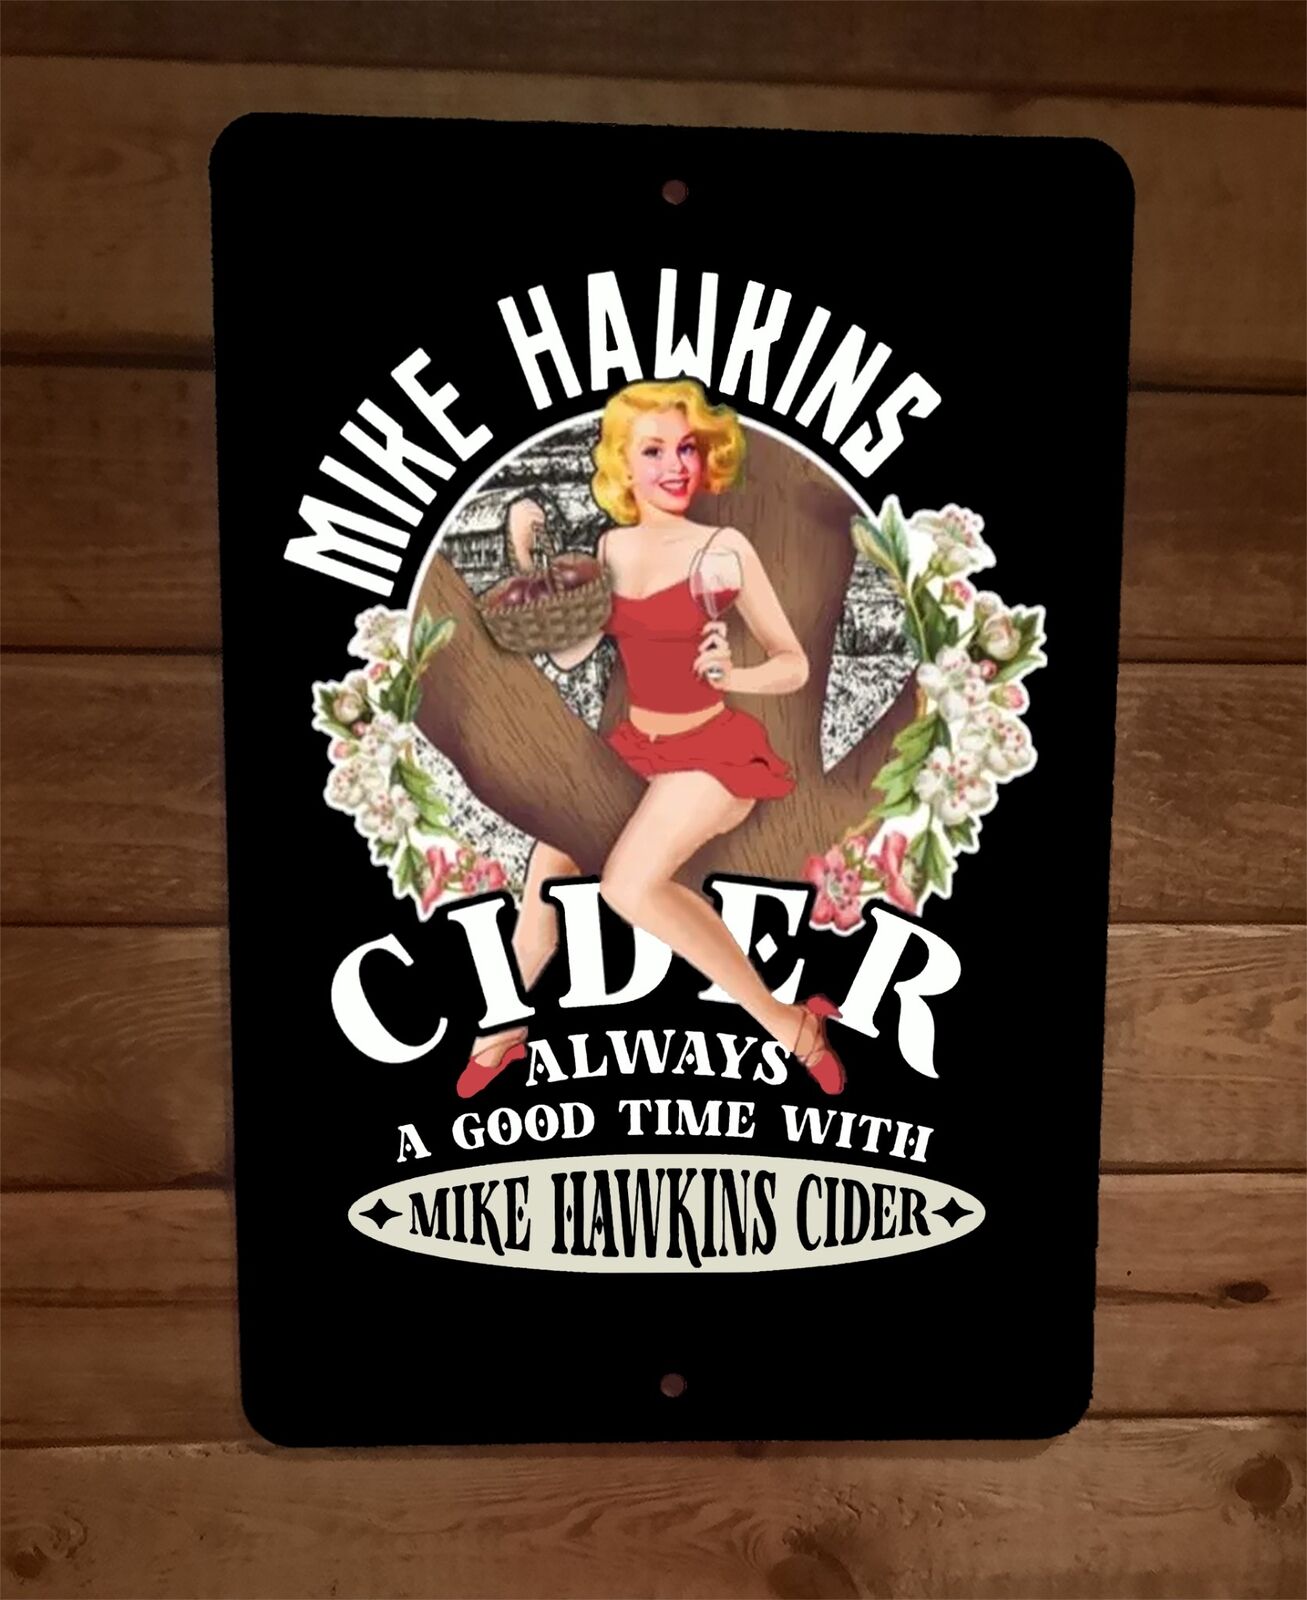 Mike Hawkins Cider Always a Good Time 8x12 Metal Wall Sign